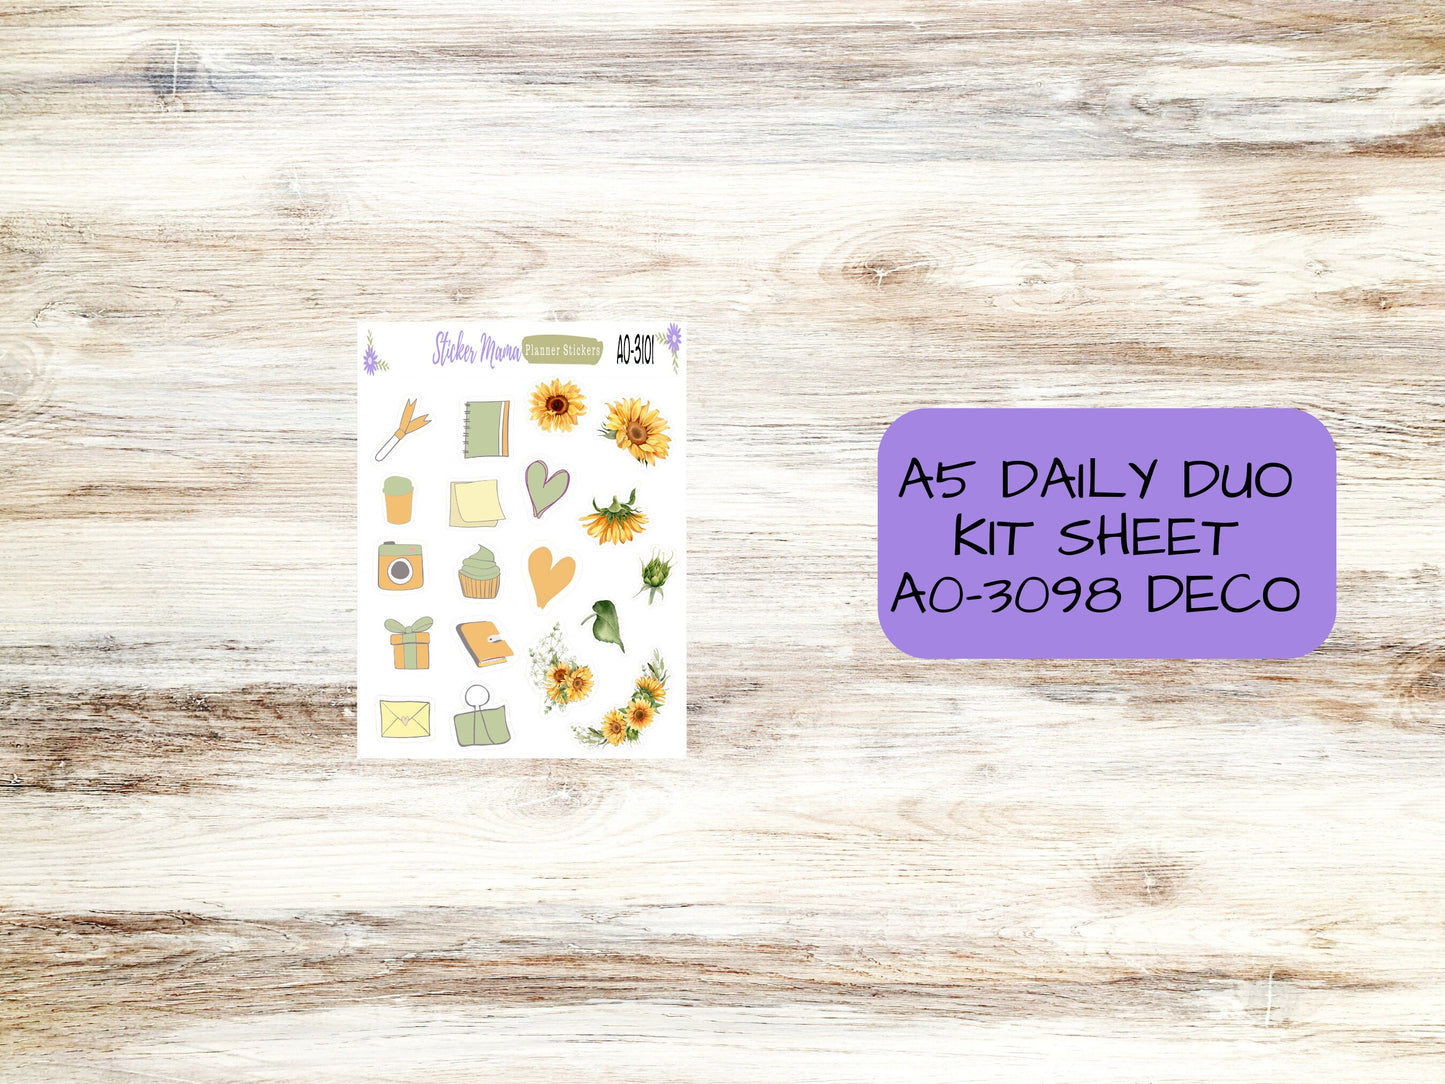 A5-DAILY DUO-Kit #3101 || Blooming Sunflowers || Planner Stickers - Daily Duo A5 Planner - Daily Duo Stickers - Daily Planner